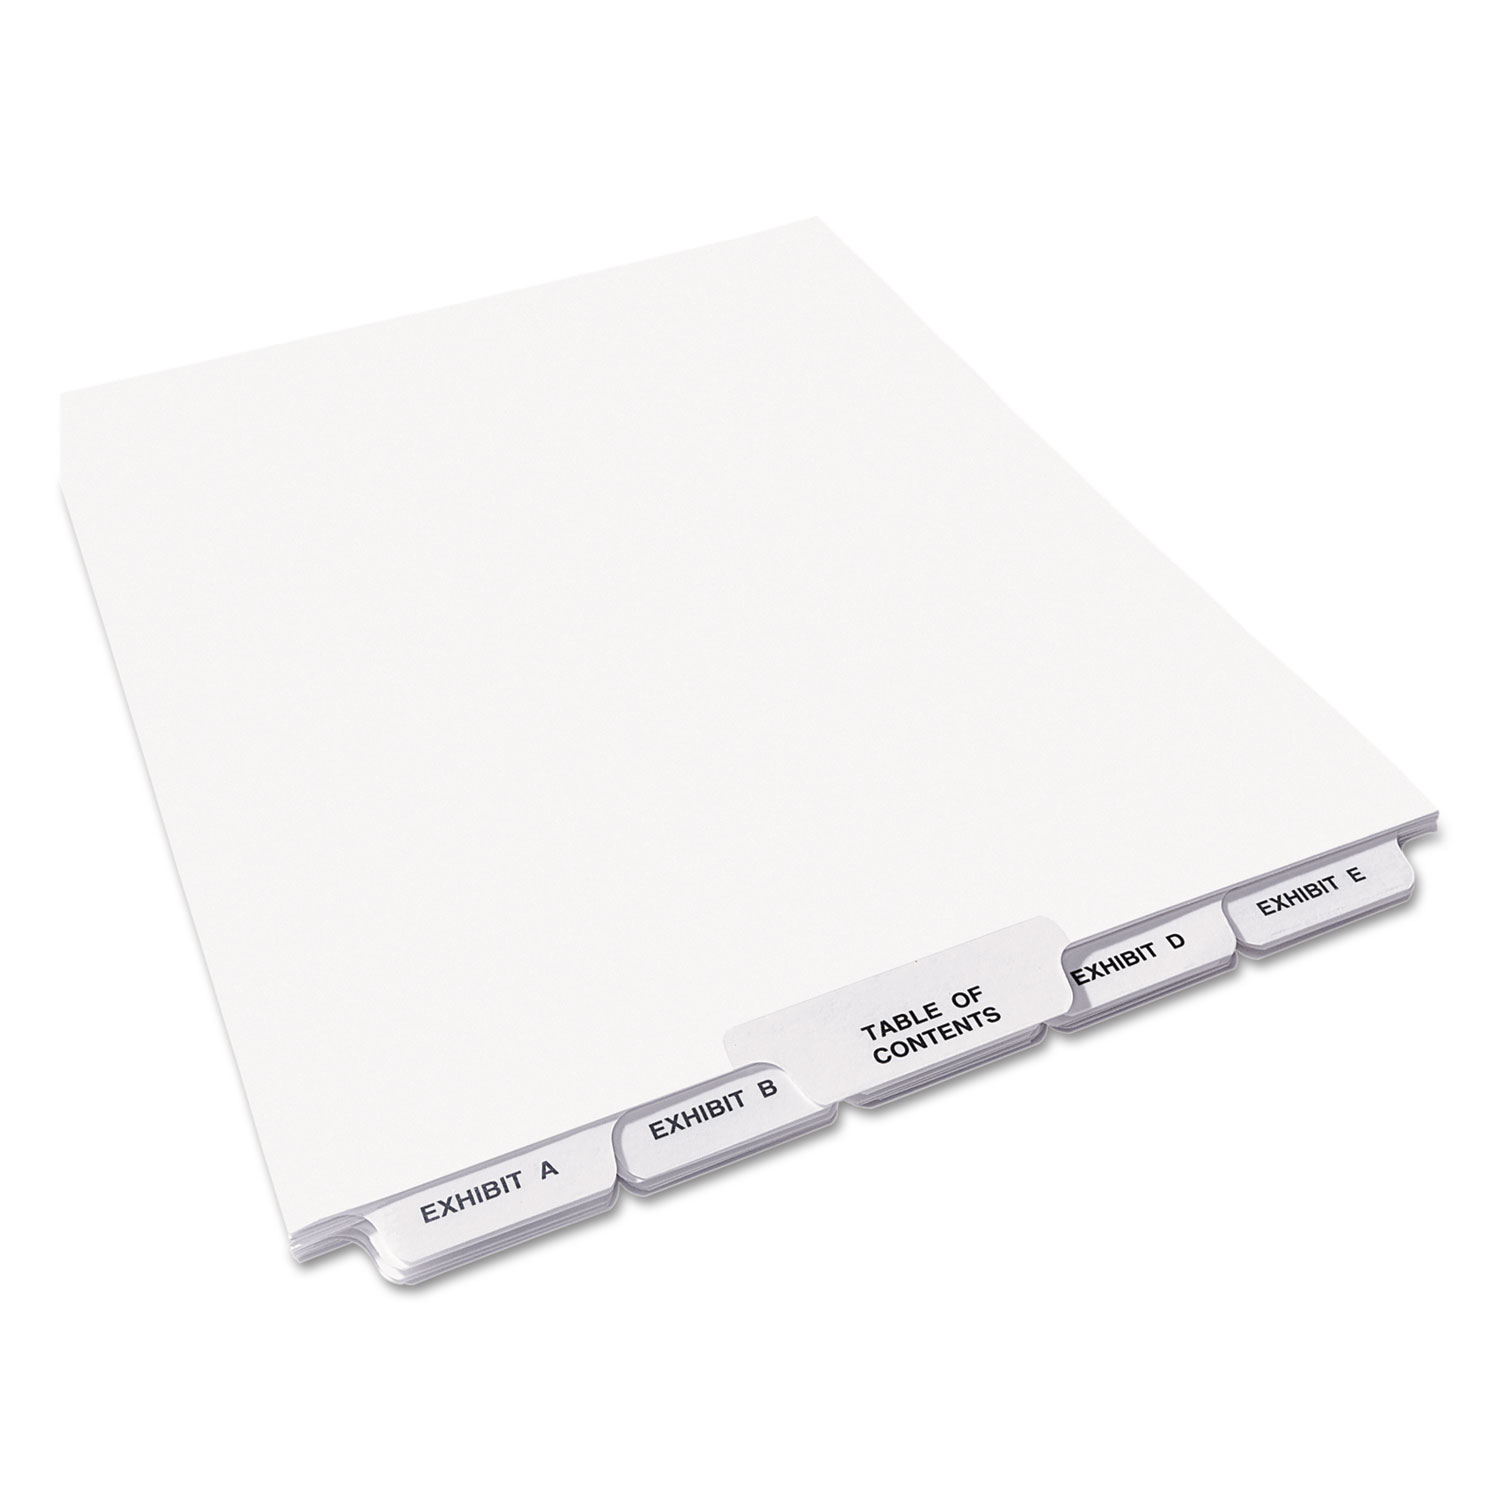  Avery 11376 Preprinted Legal Exhibit Bottom Tab Index Dividers, Avery Style, 27-Tab, Exhibit A to Exhibit Z, 11 x 8.5, White, 1 Set (AVE11376) 